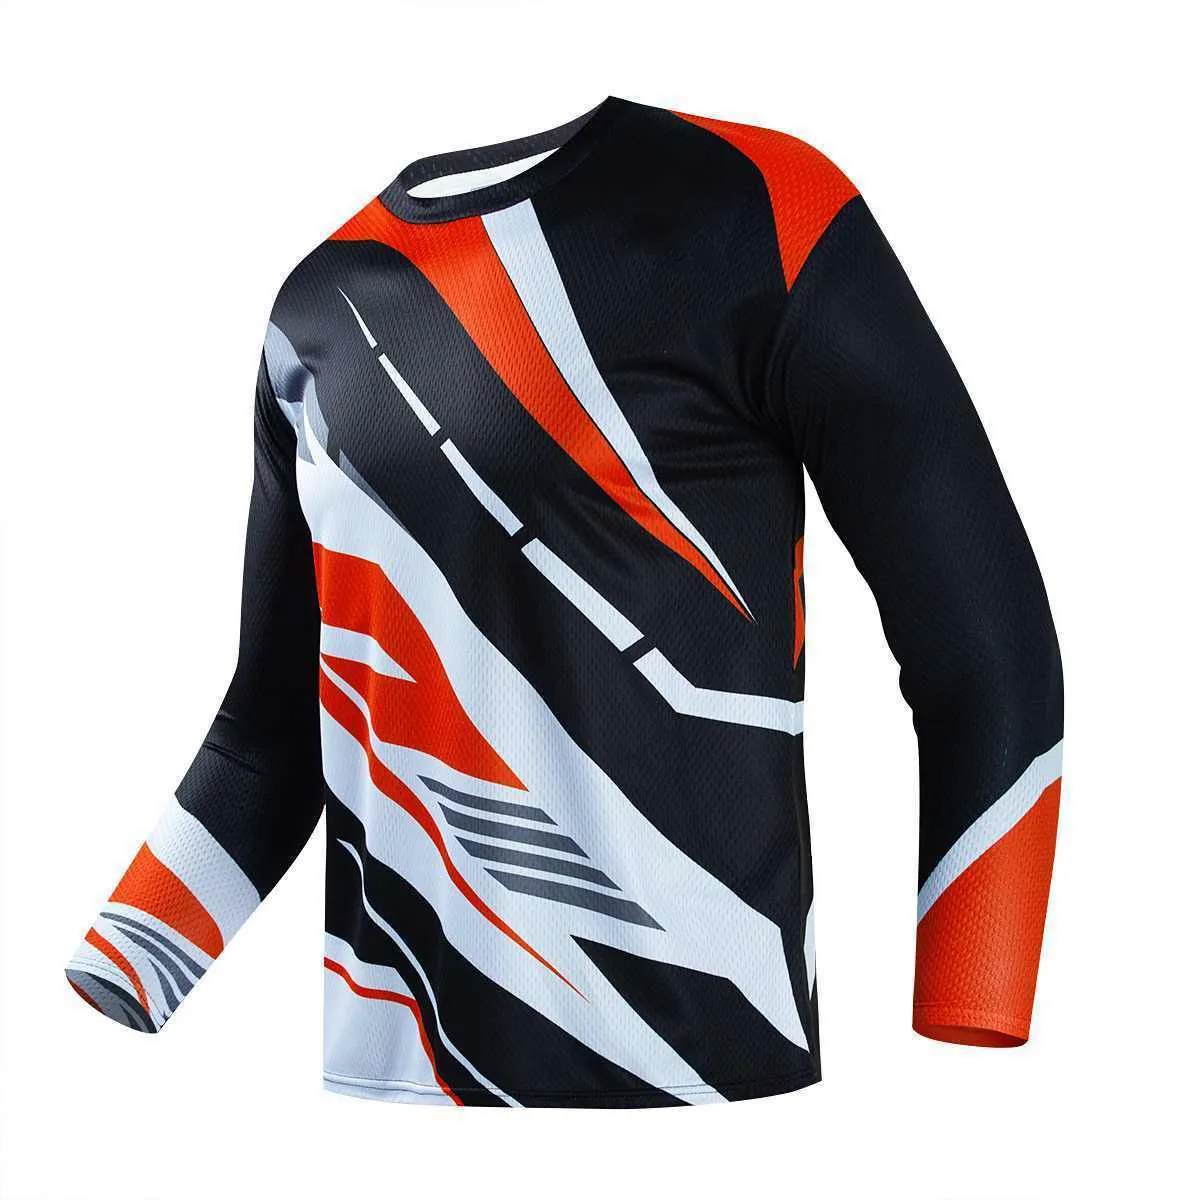 Quick Drying Breathable Motocross Clothing Men's Long Sleeve Cycling Tops Best Seller Men's Downhill Jerseys PRO Team Shirts